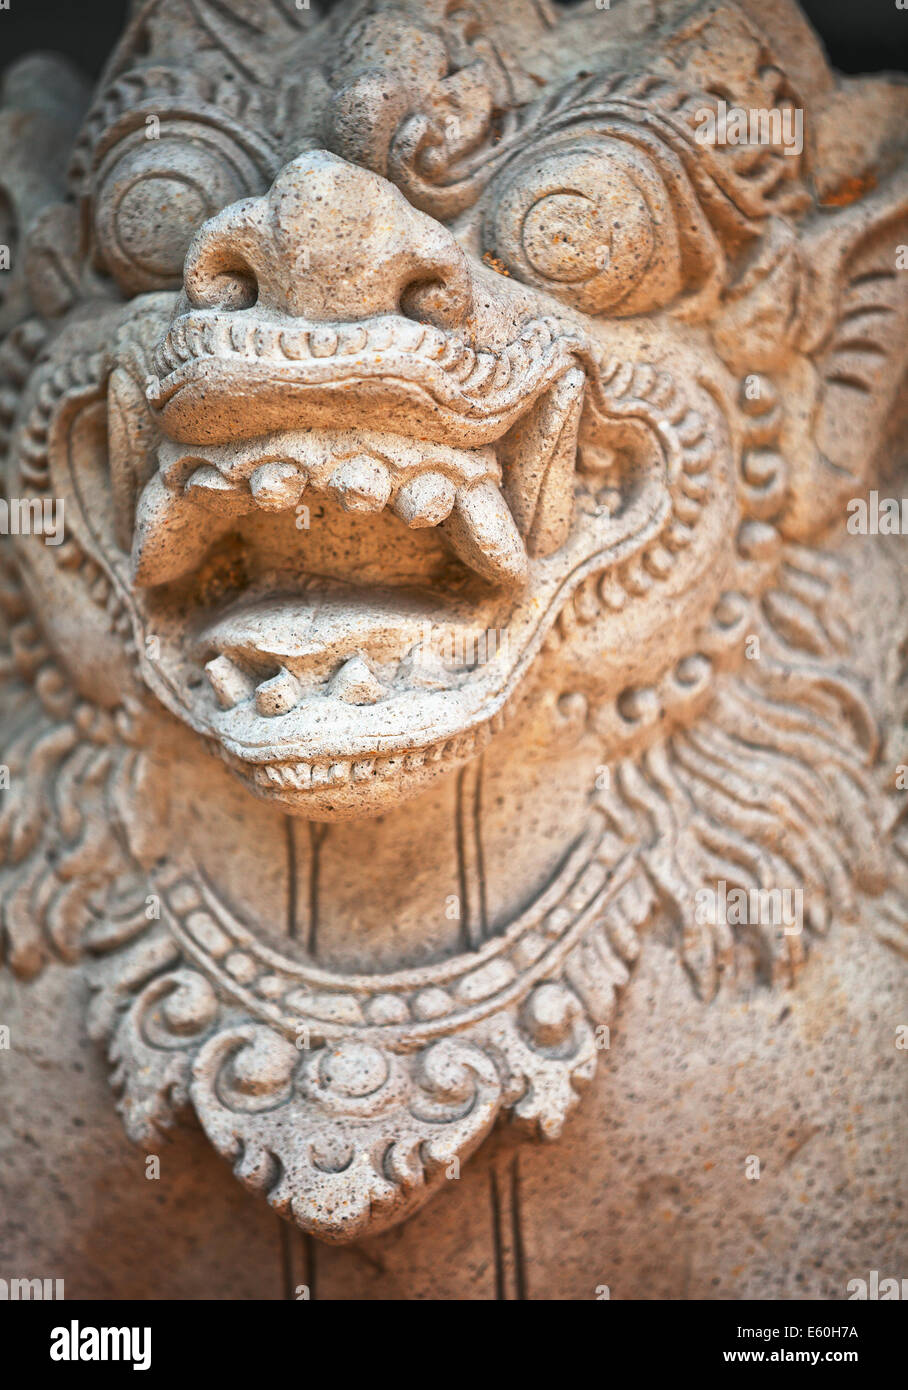 Muzzle of terrible mythical monster. Stone old statue from Indonesia, Bali island Stock Photo